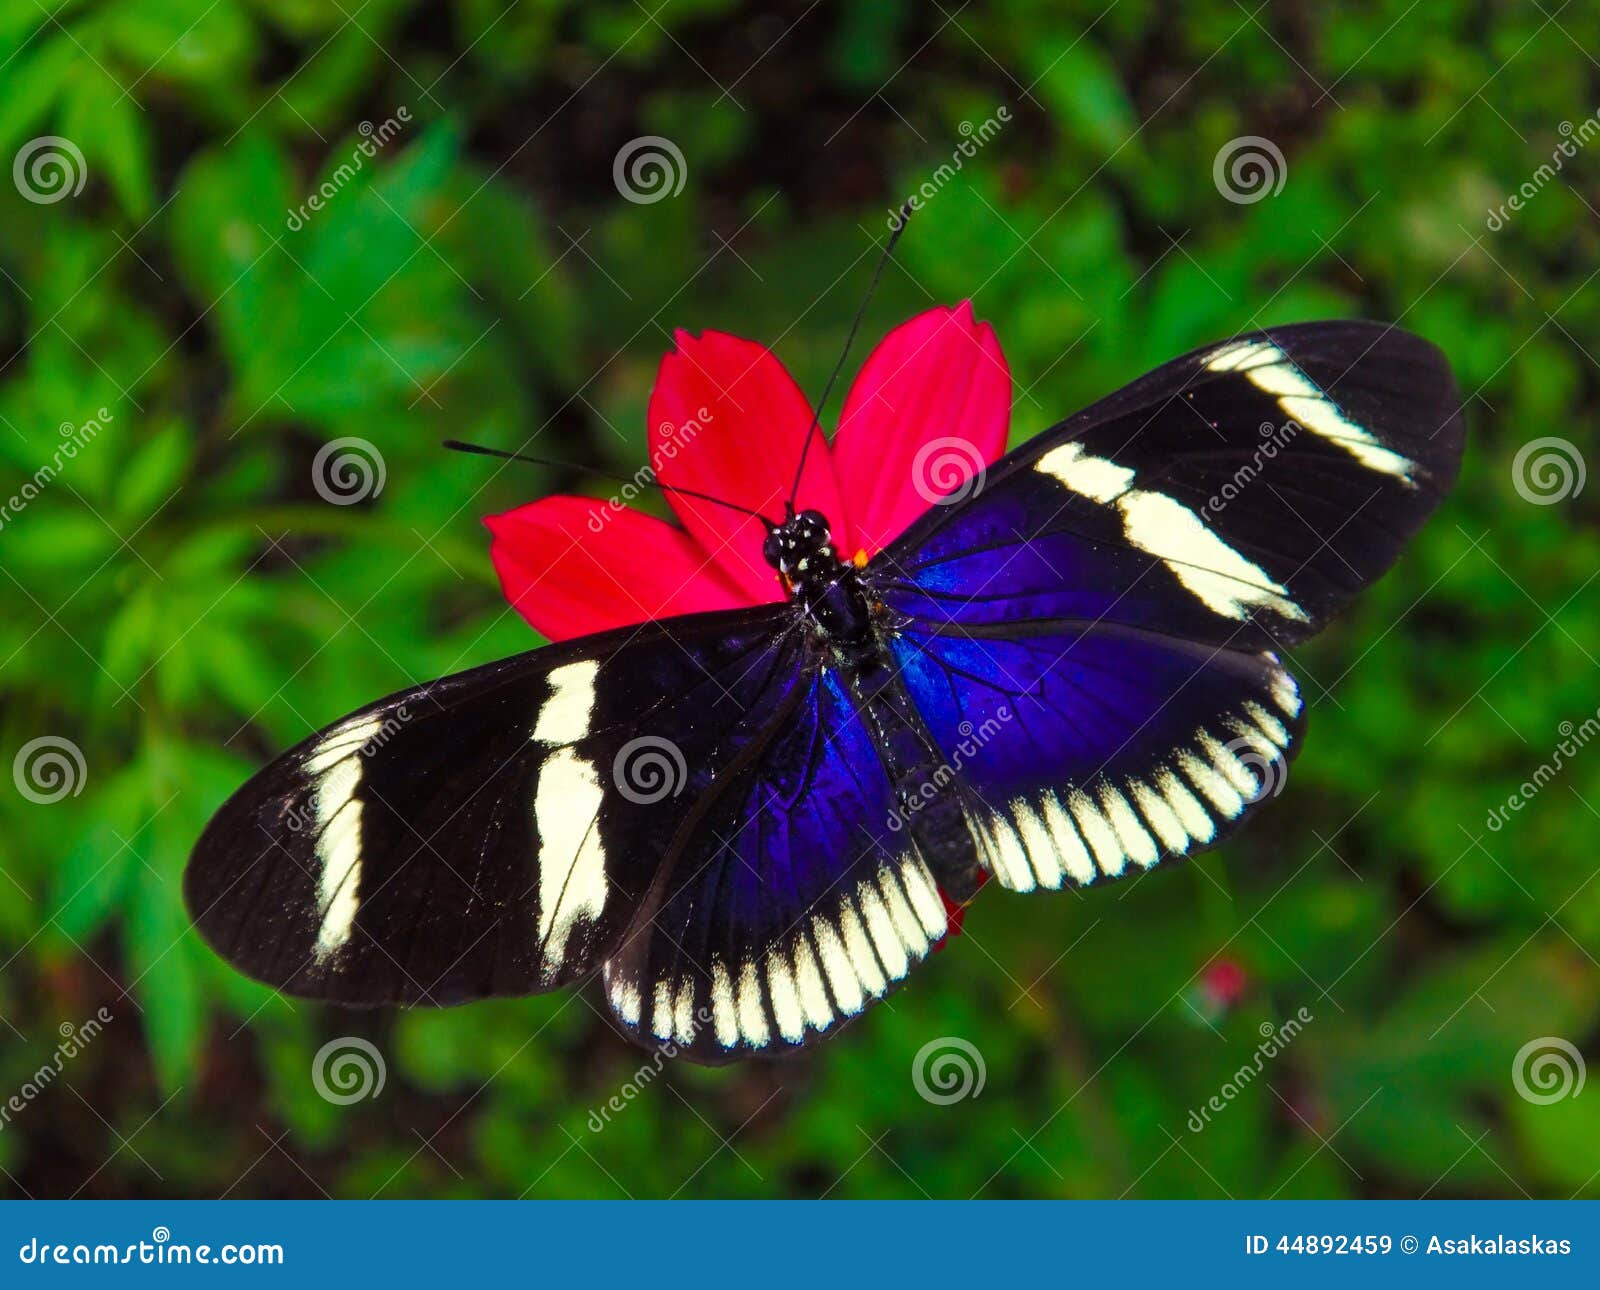 costa rican butterfly